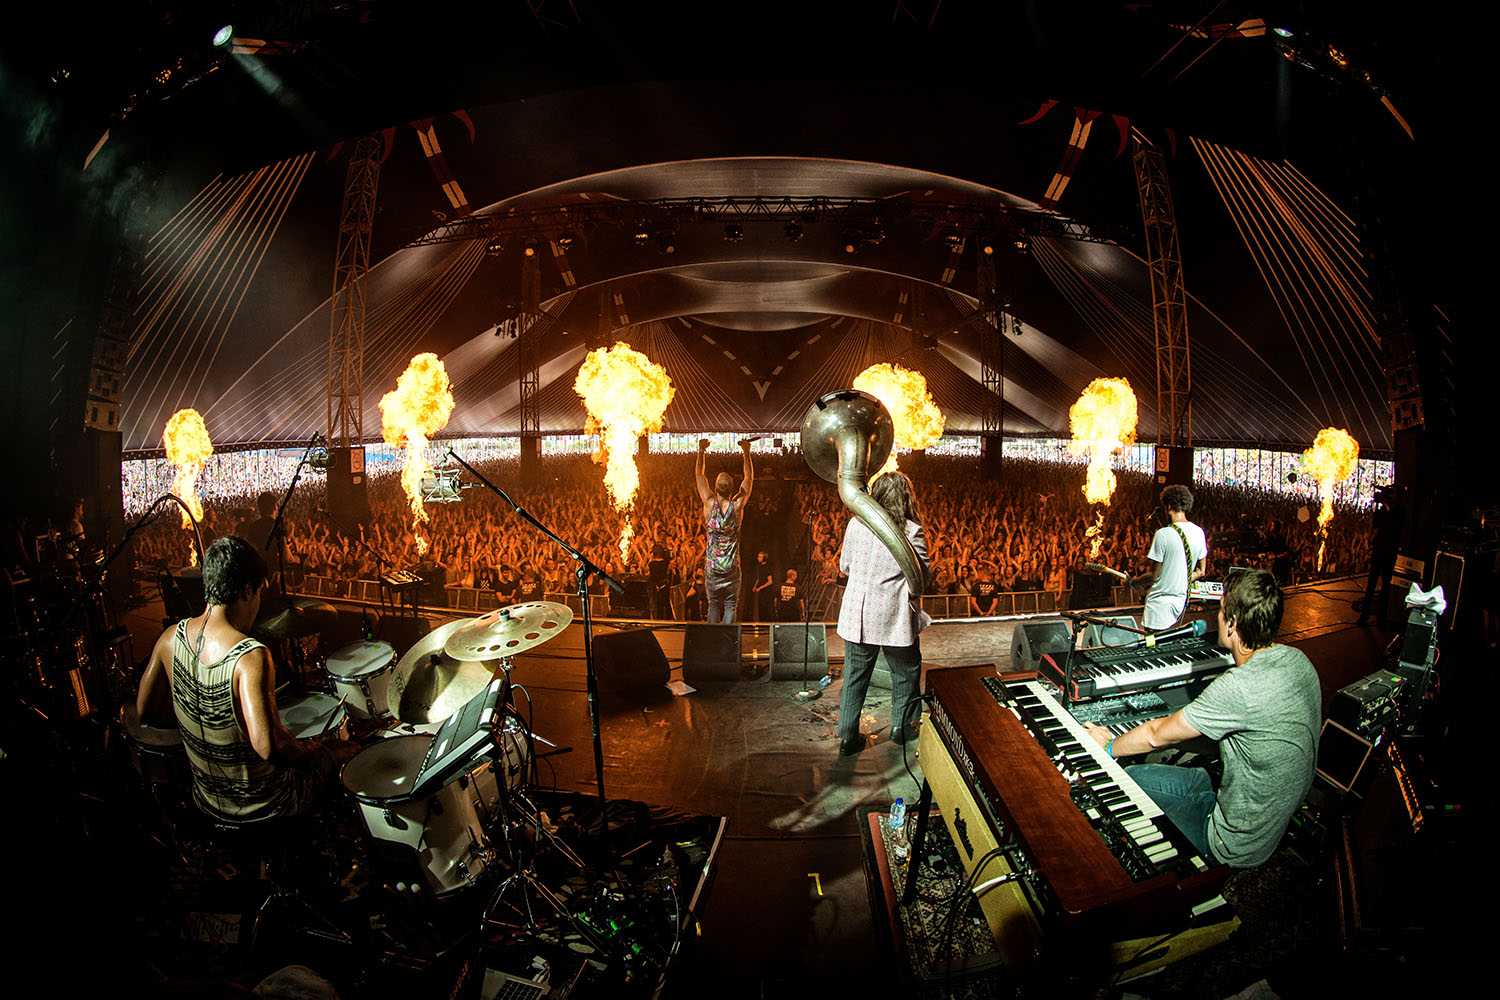 CHEF’SPECIAL AT LOWLANDS MAINSTAGE